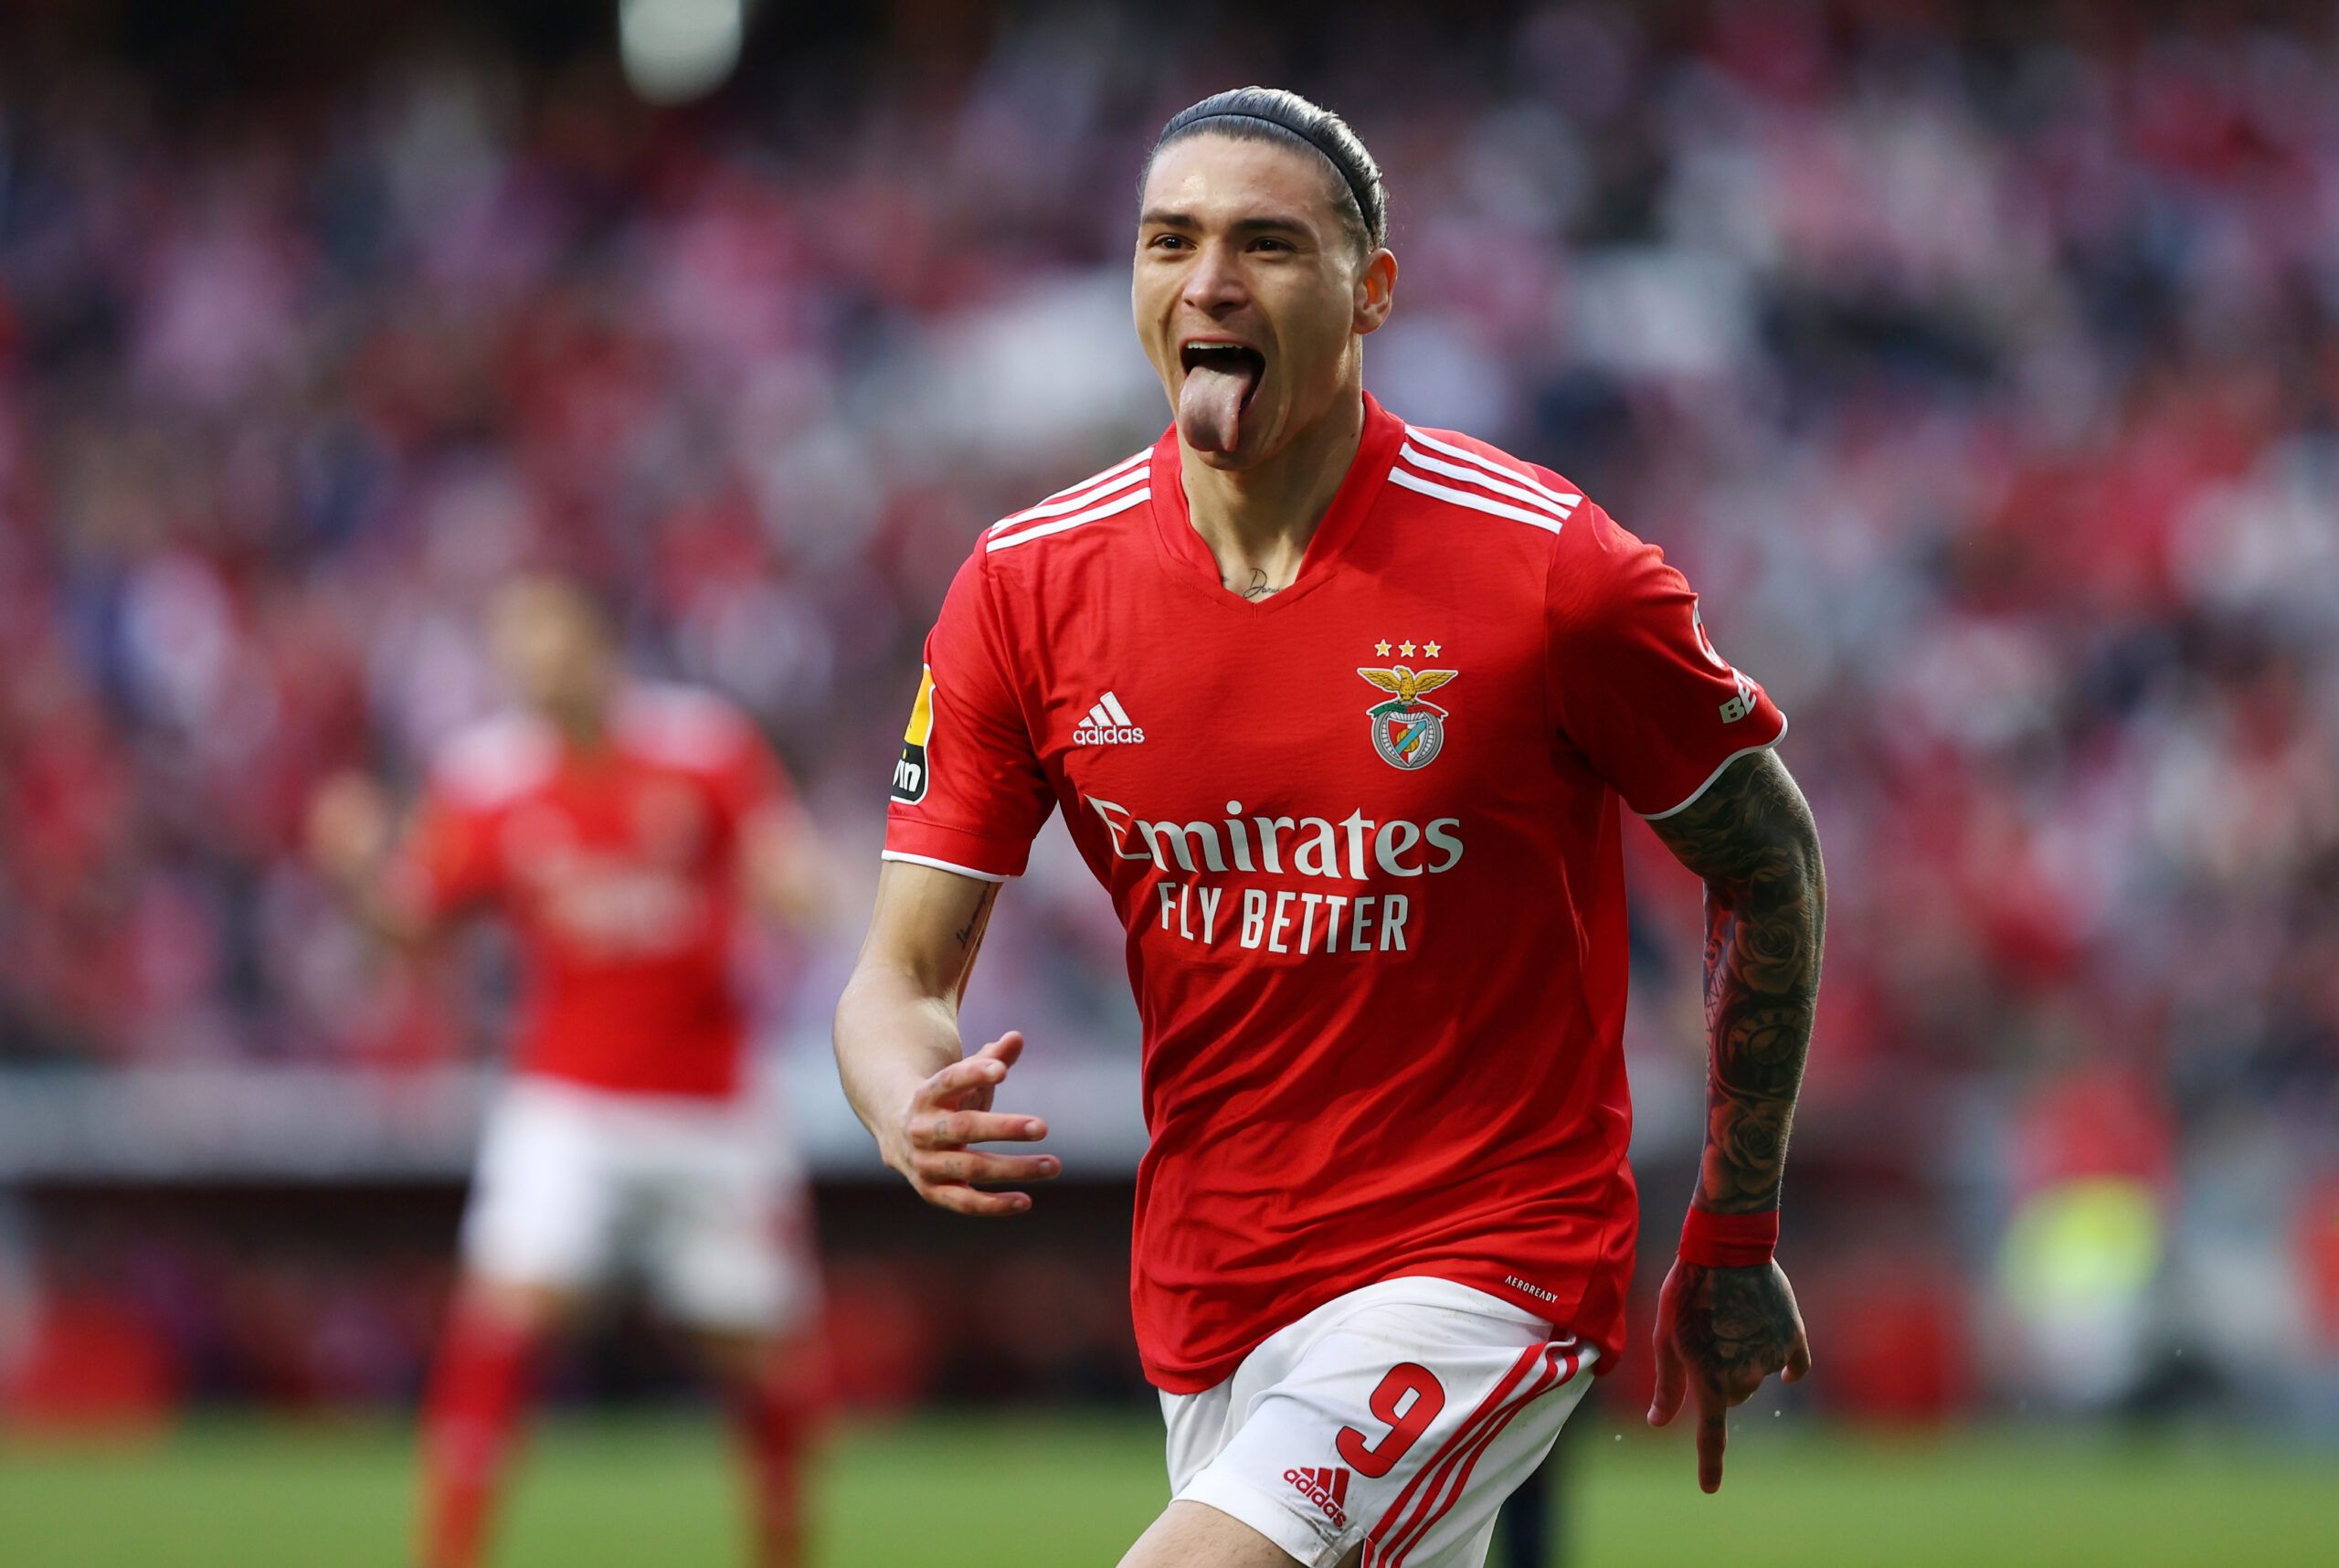 Darwin Nunez was on fire for Benfica in the 21/22 season